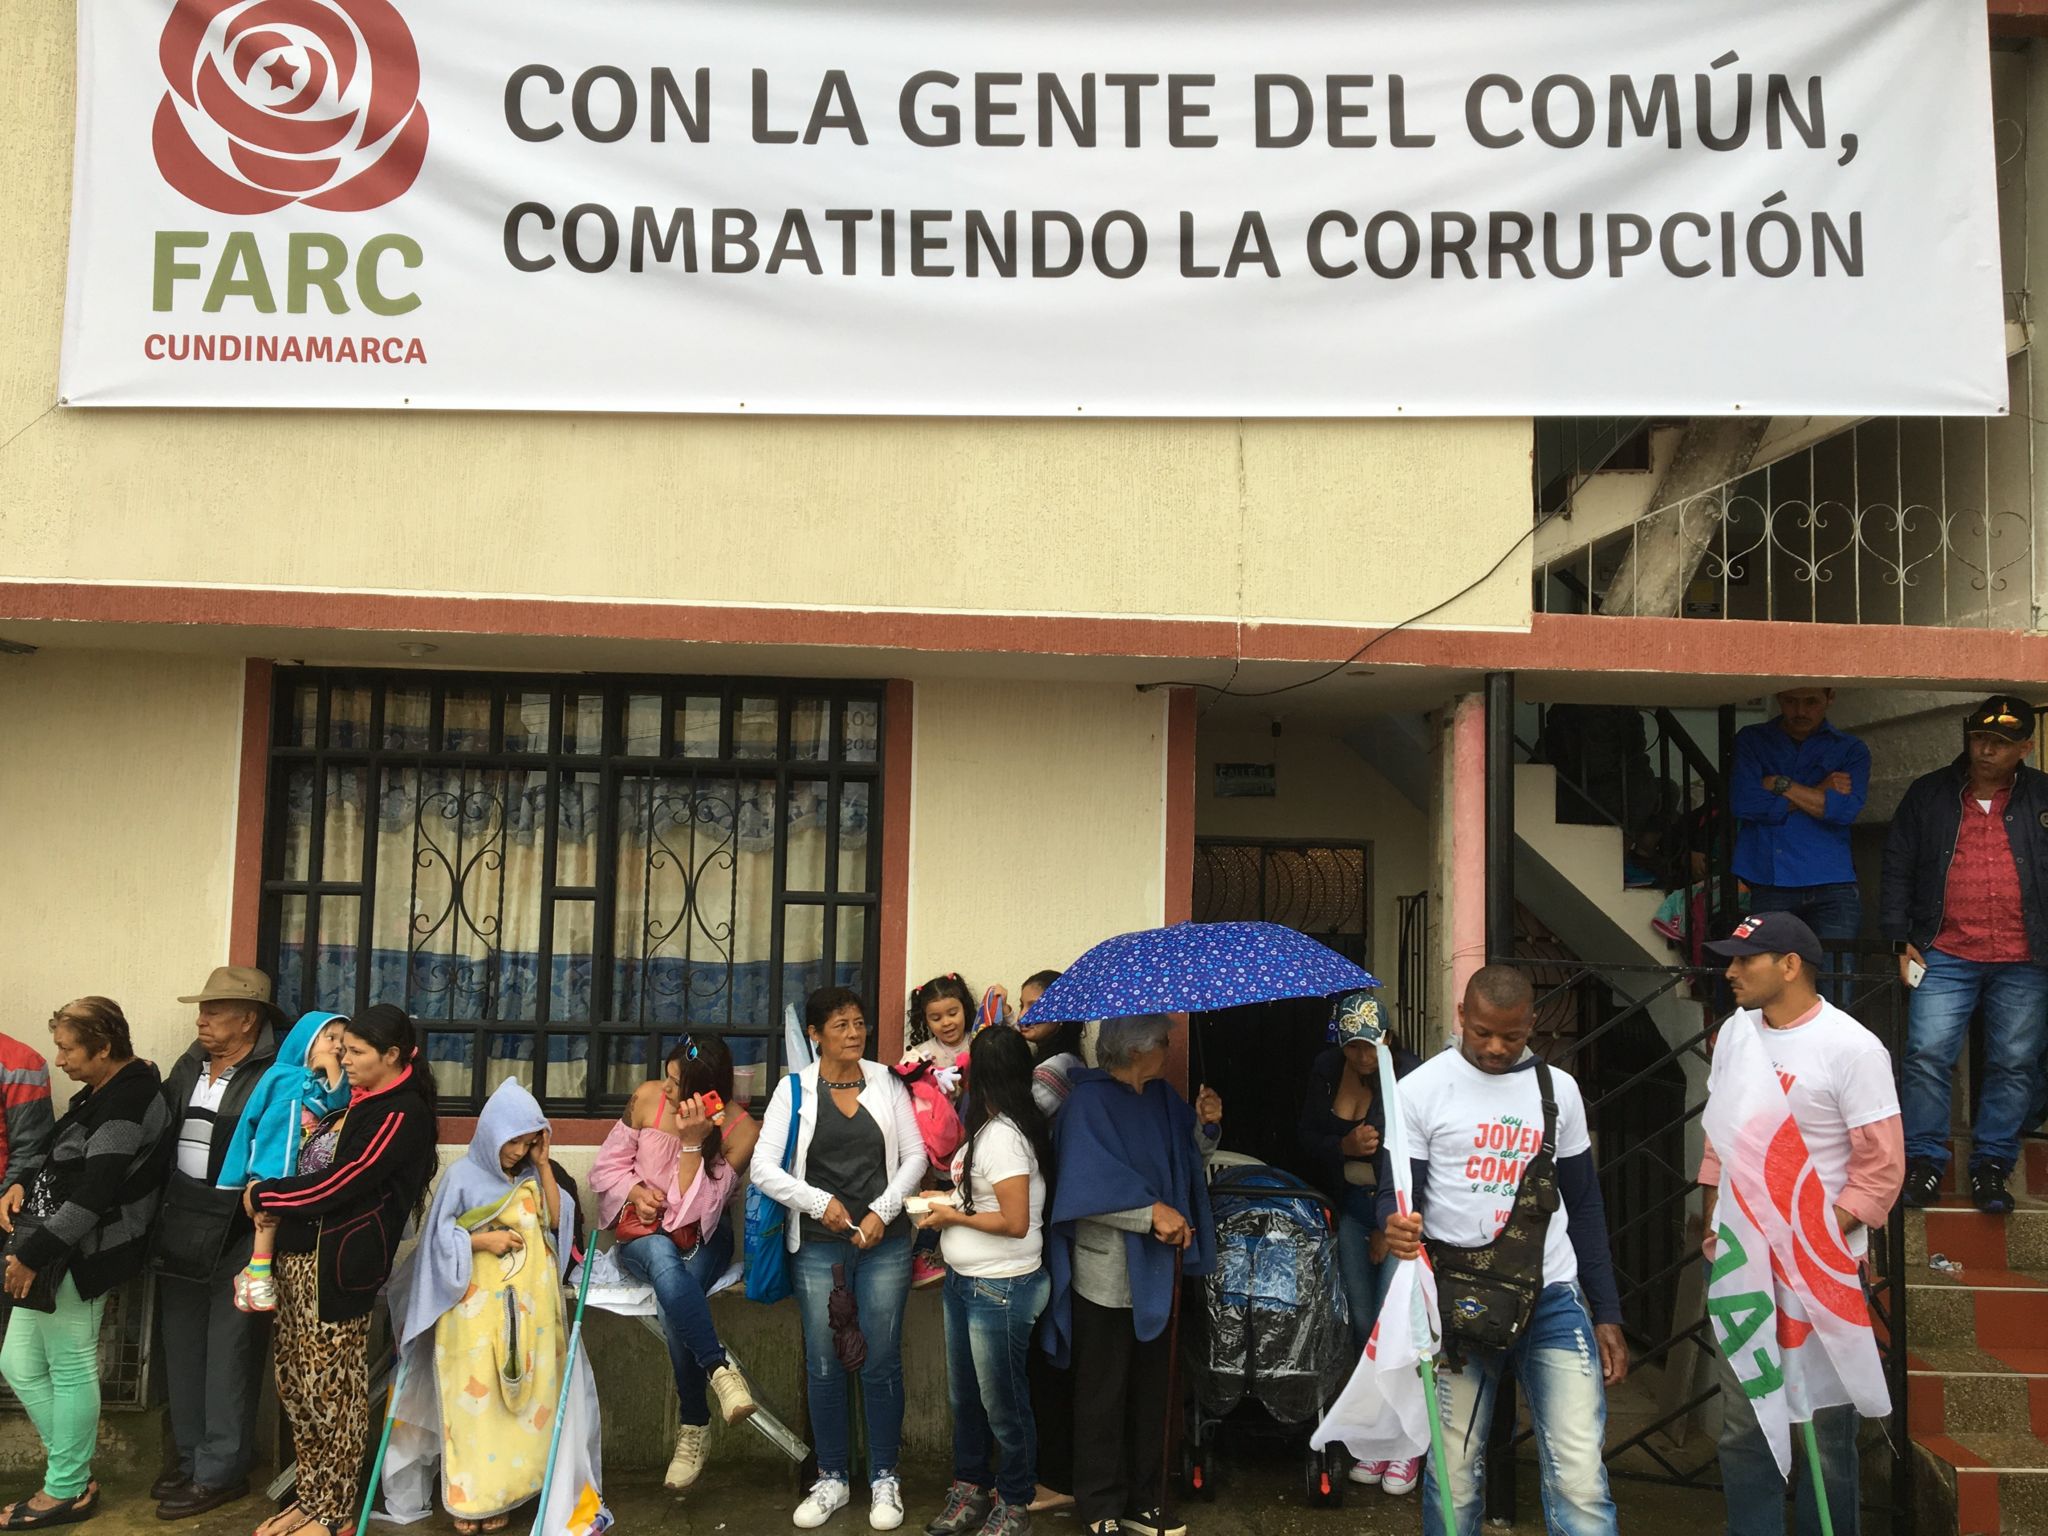 A Farc campaign banner proclaims that the Farc is combating corruption in the town of Fusagasugá